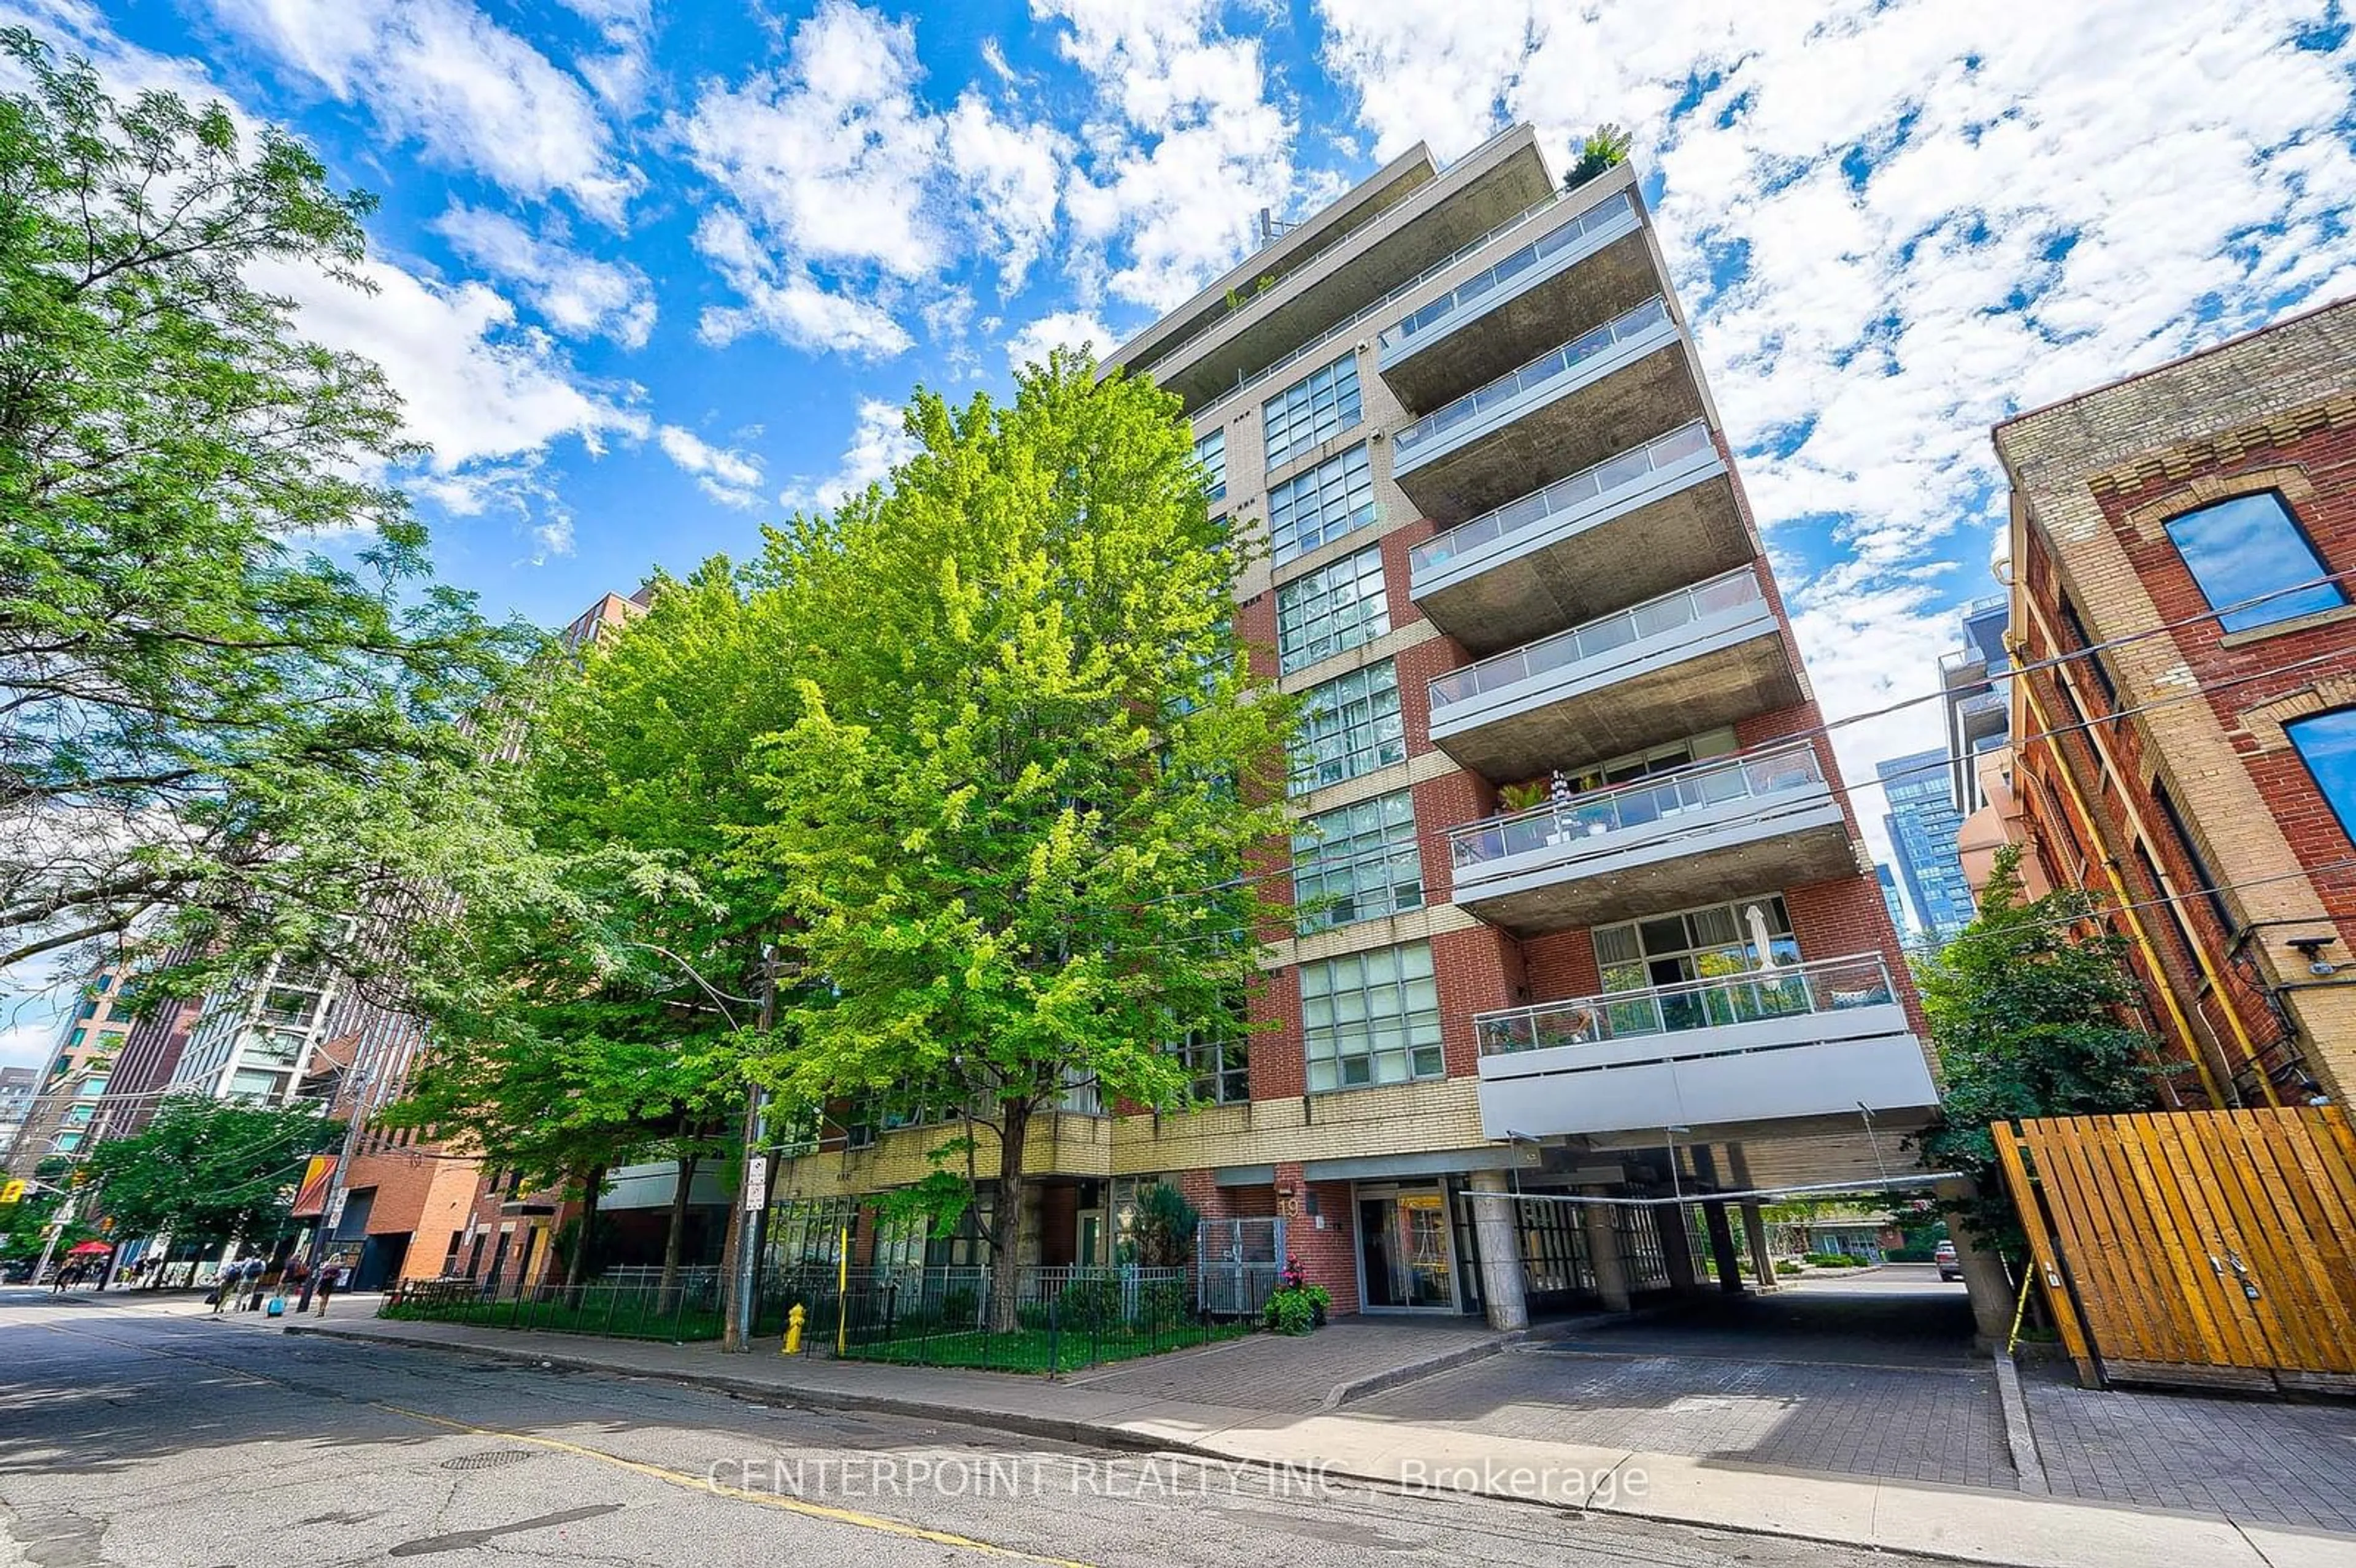 A pic from exterior of the house or condo for 19 Brant St #301, Toronto Ontario M5V 2L2